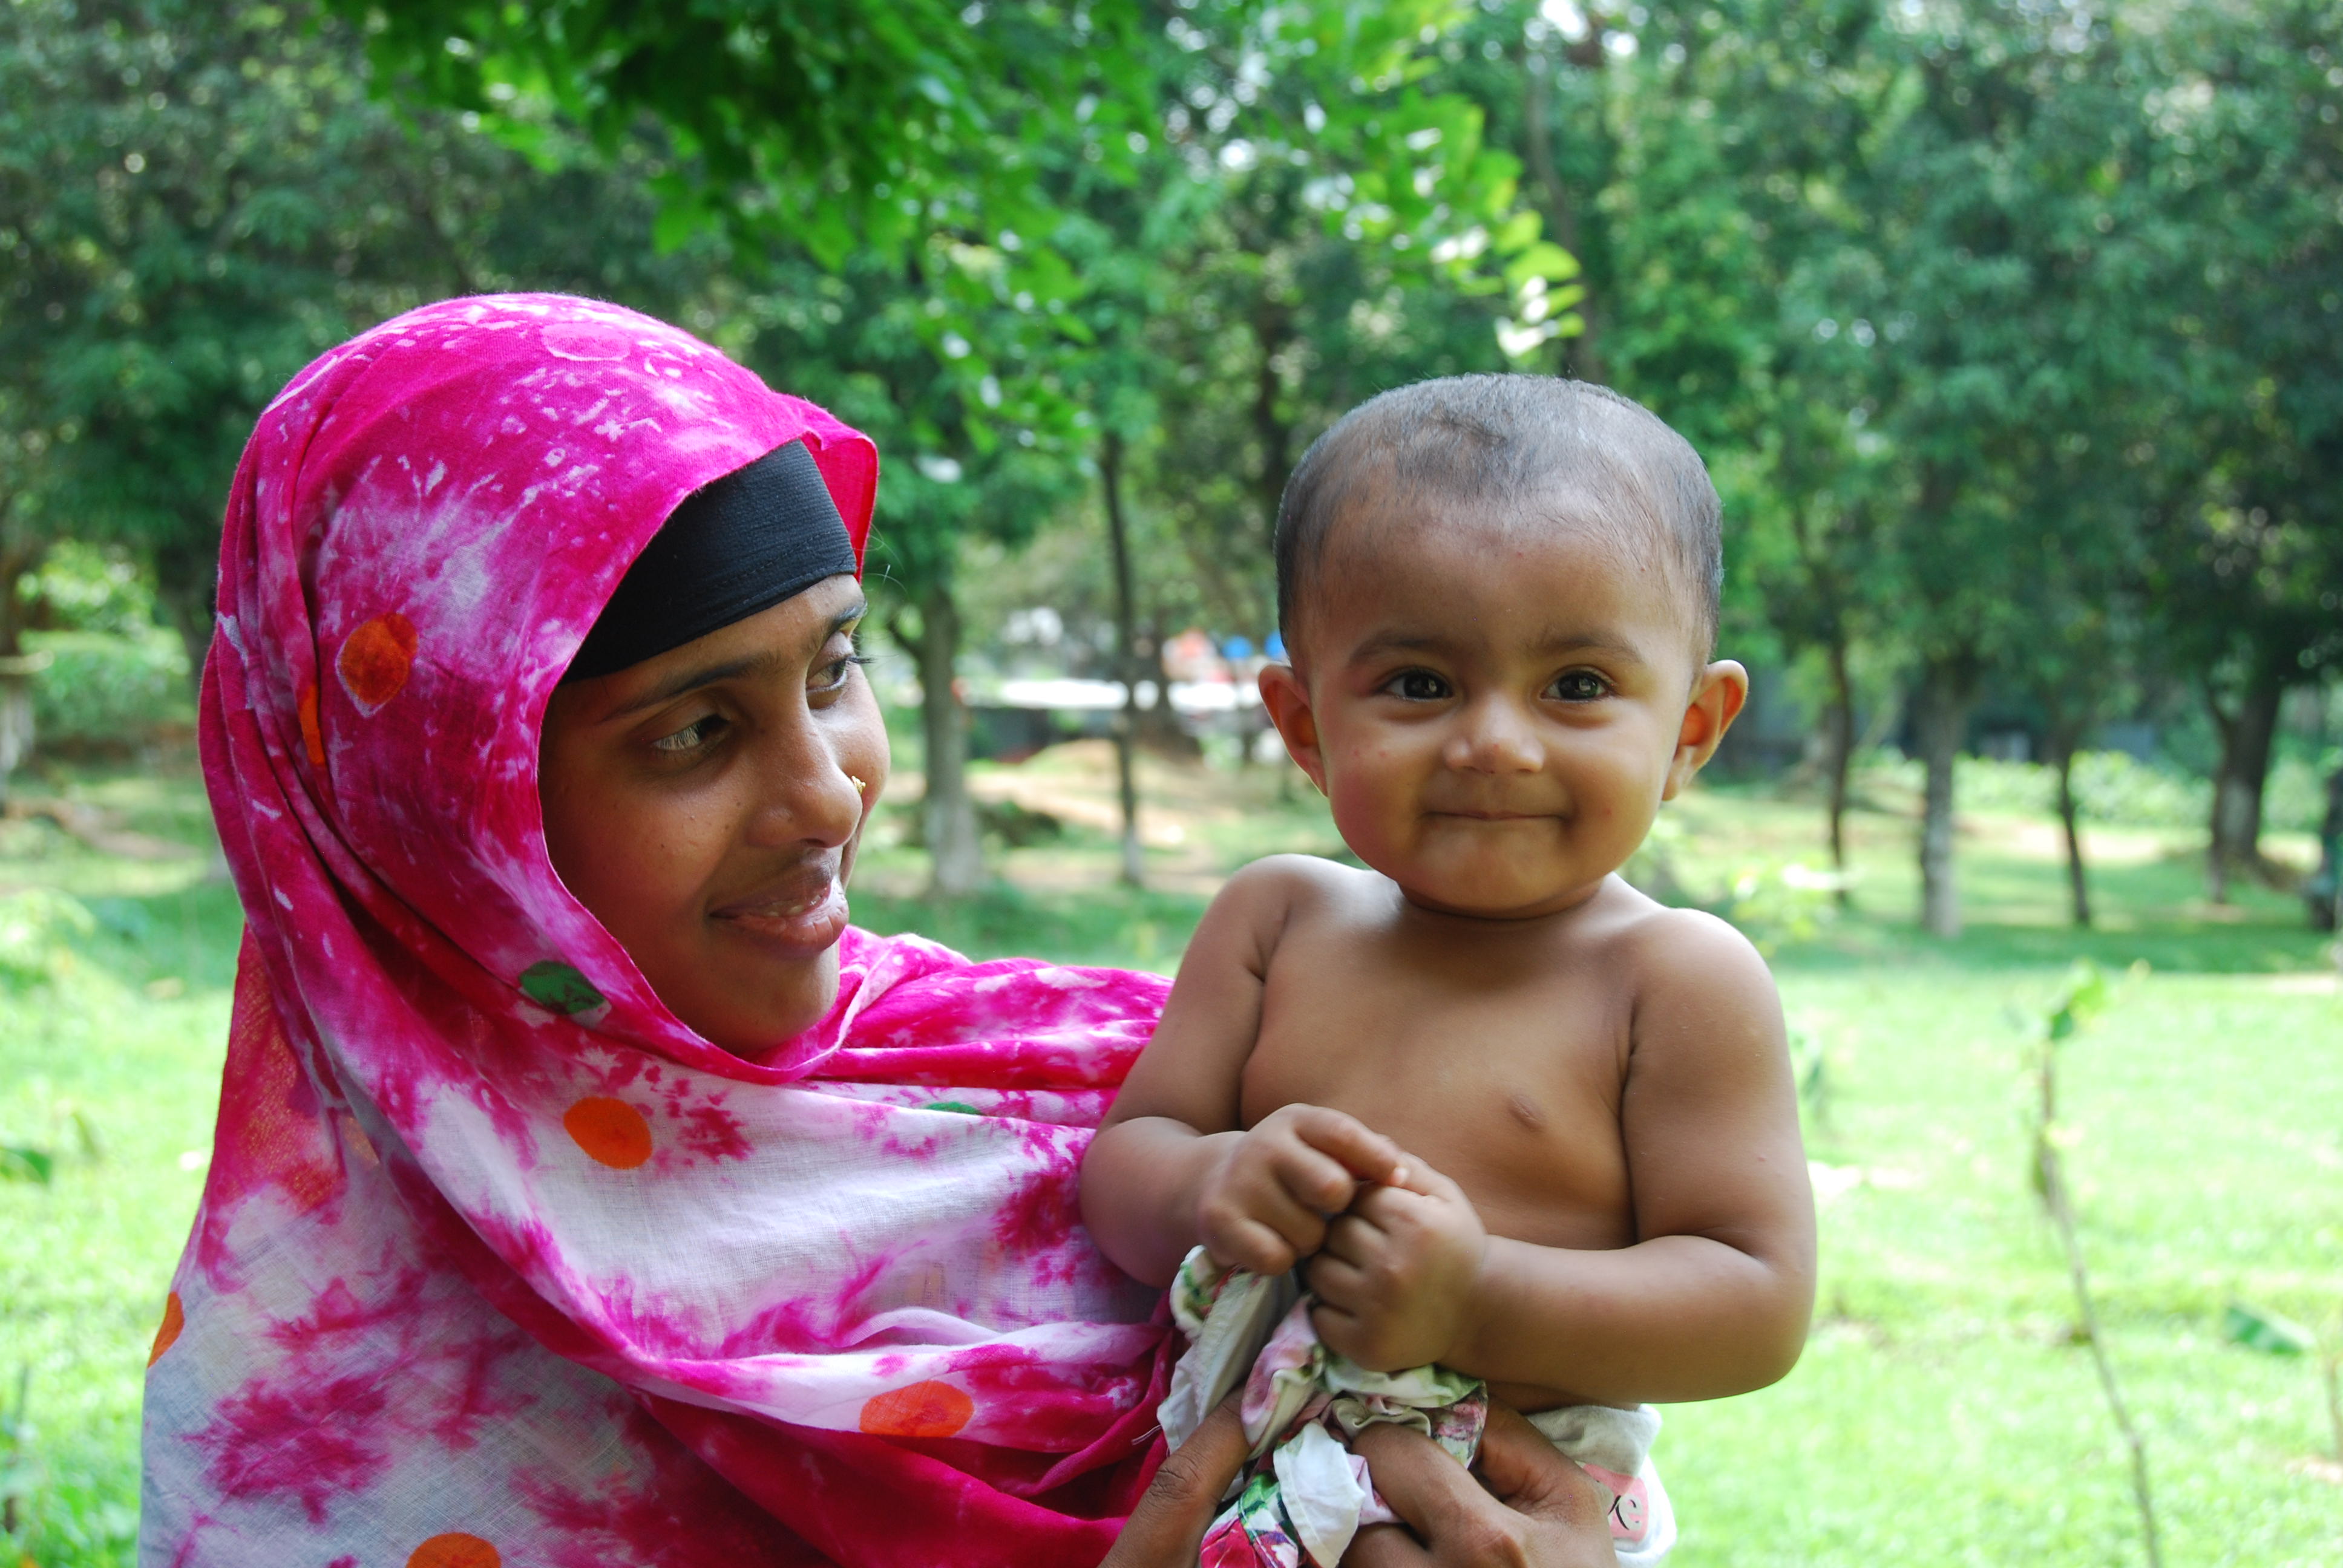 A still captured from a previous iron trial led by Professor Sant-Rayn Pasricha in Bangladesh, one of the countries included in the data analysis study that was conducted for this new research. 